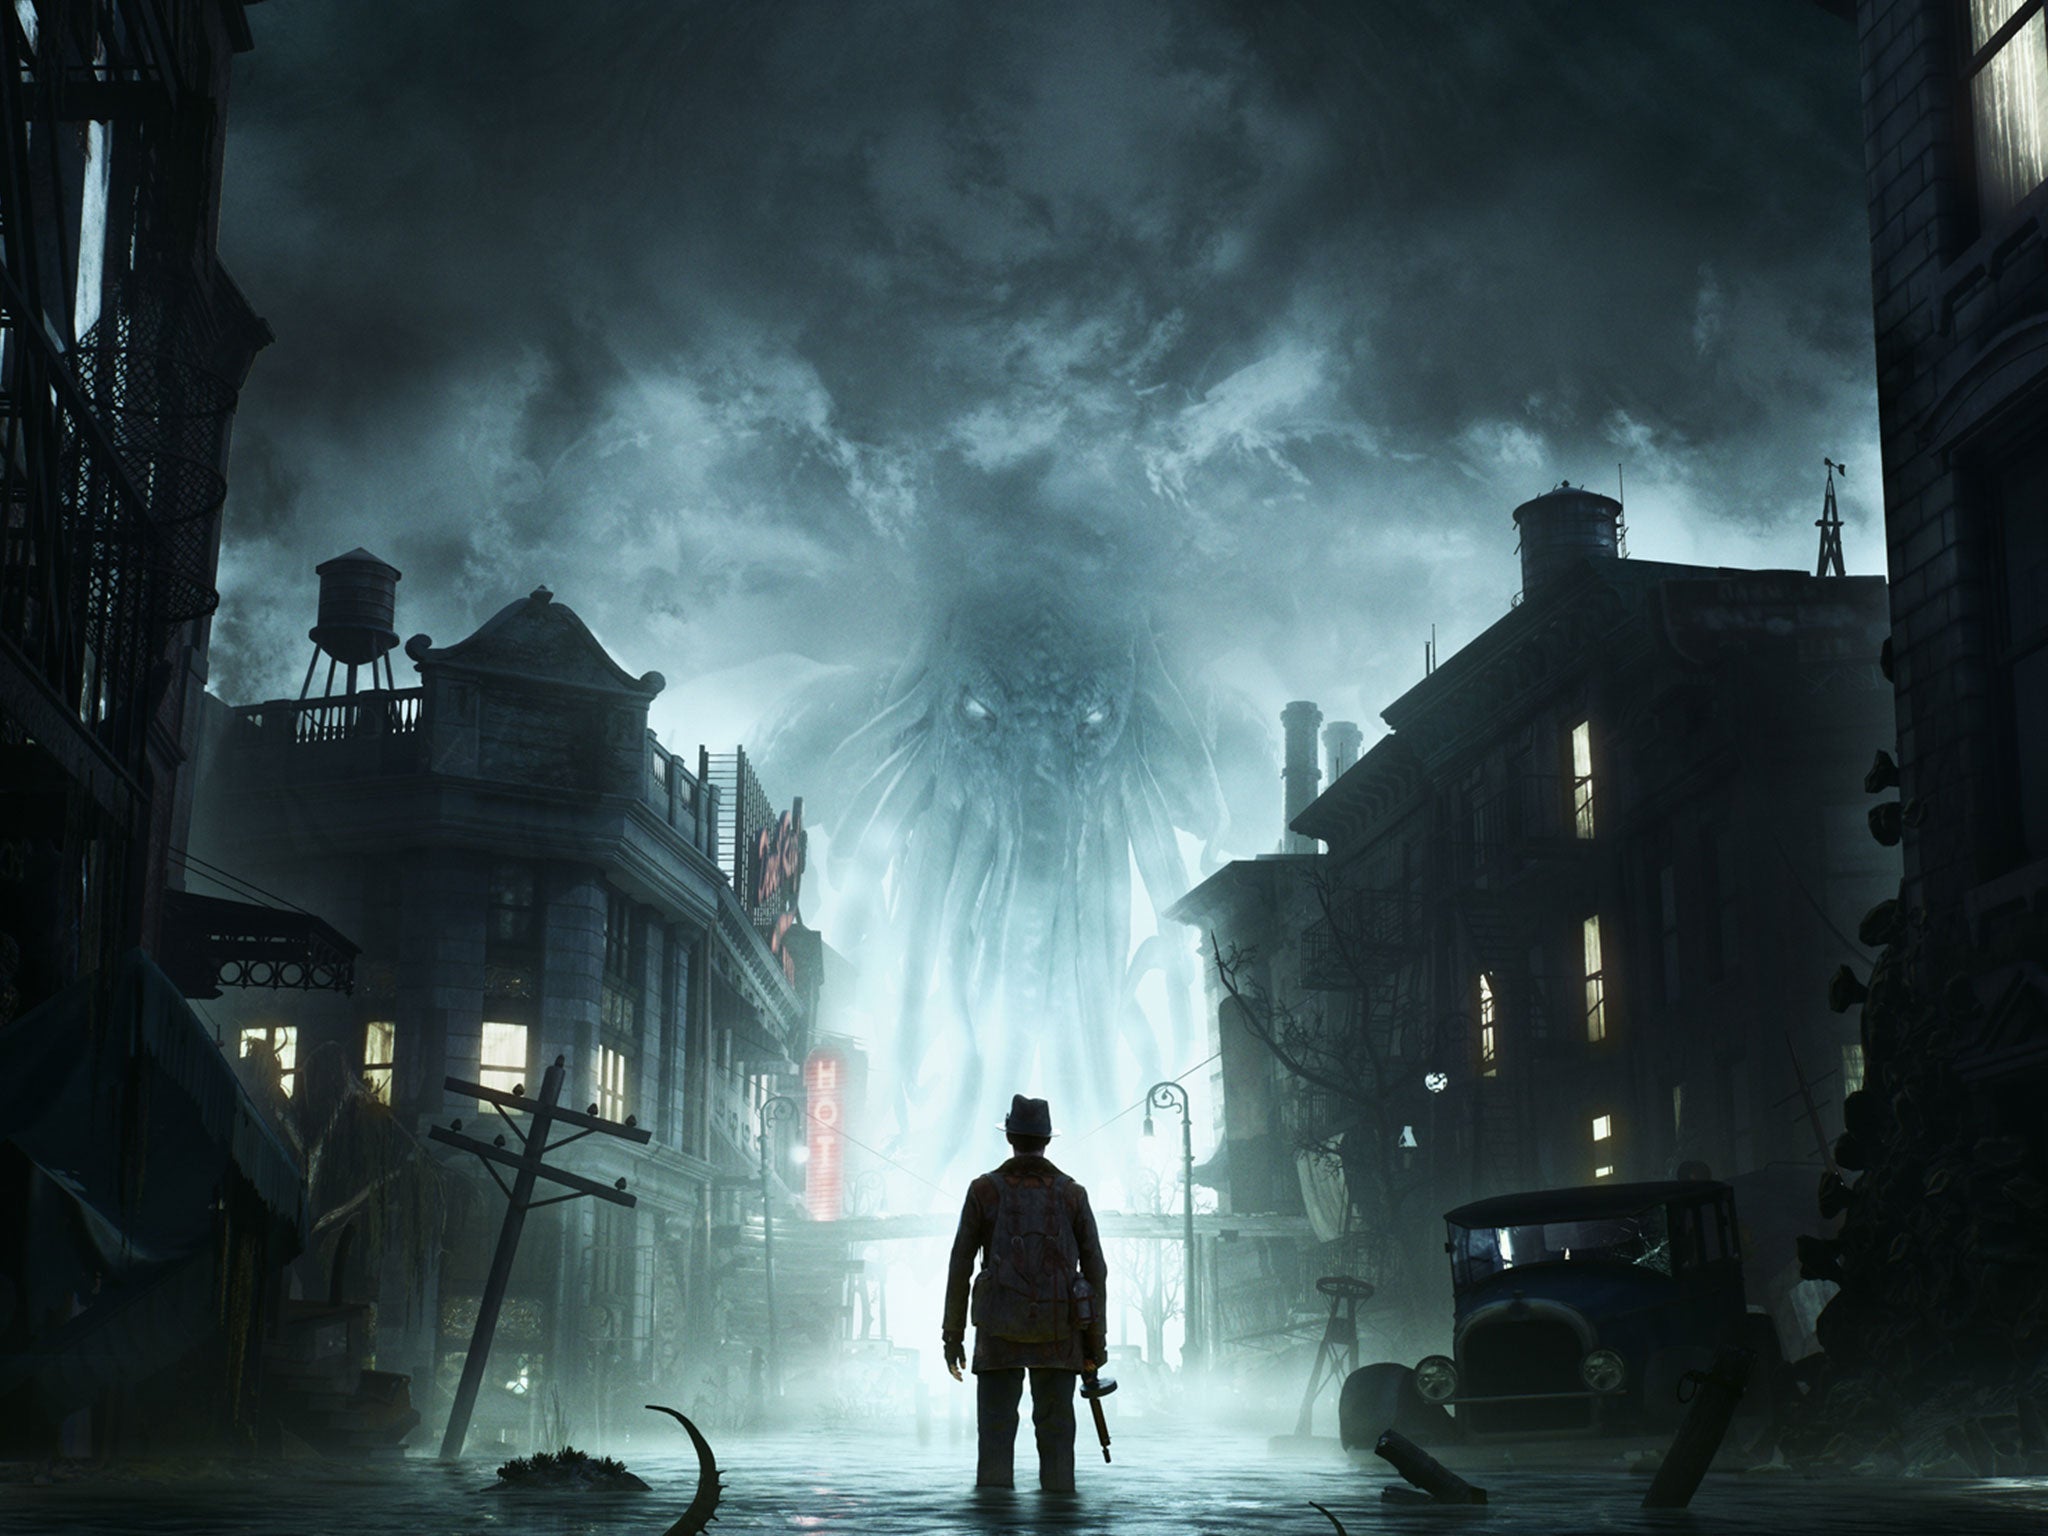 HP Lovecraft inspired detective game the Sinking City drowns under its own ambition